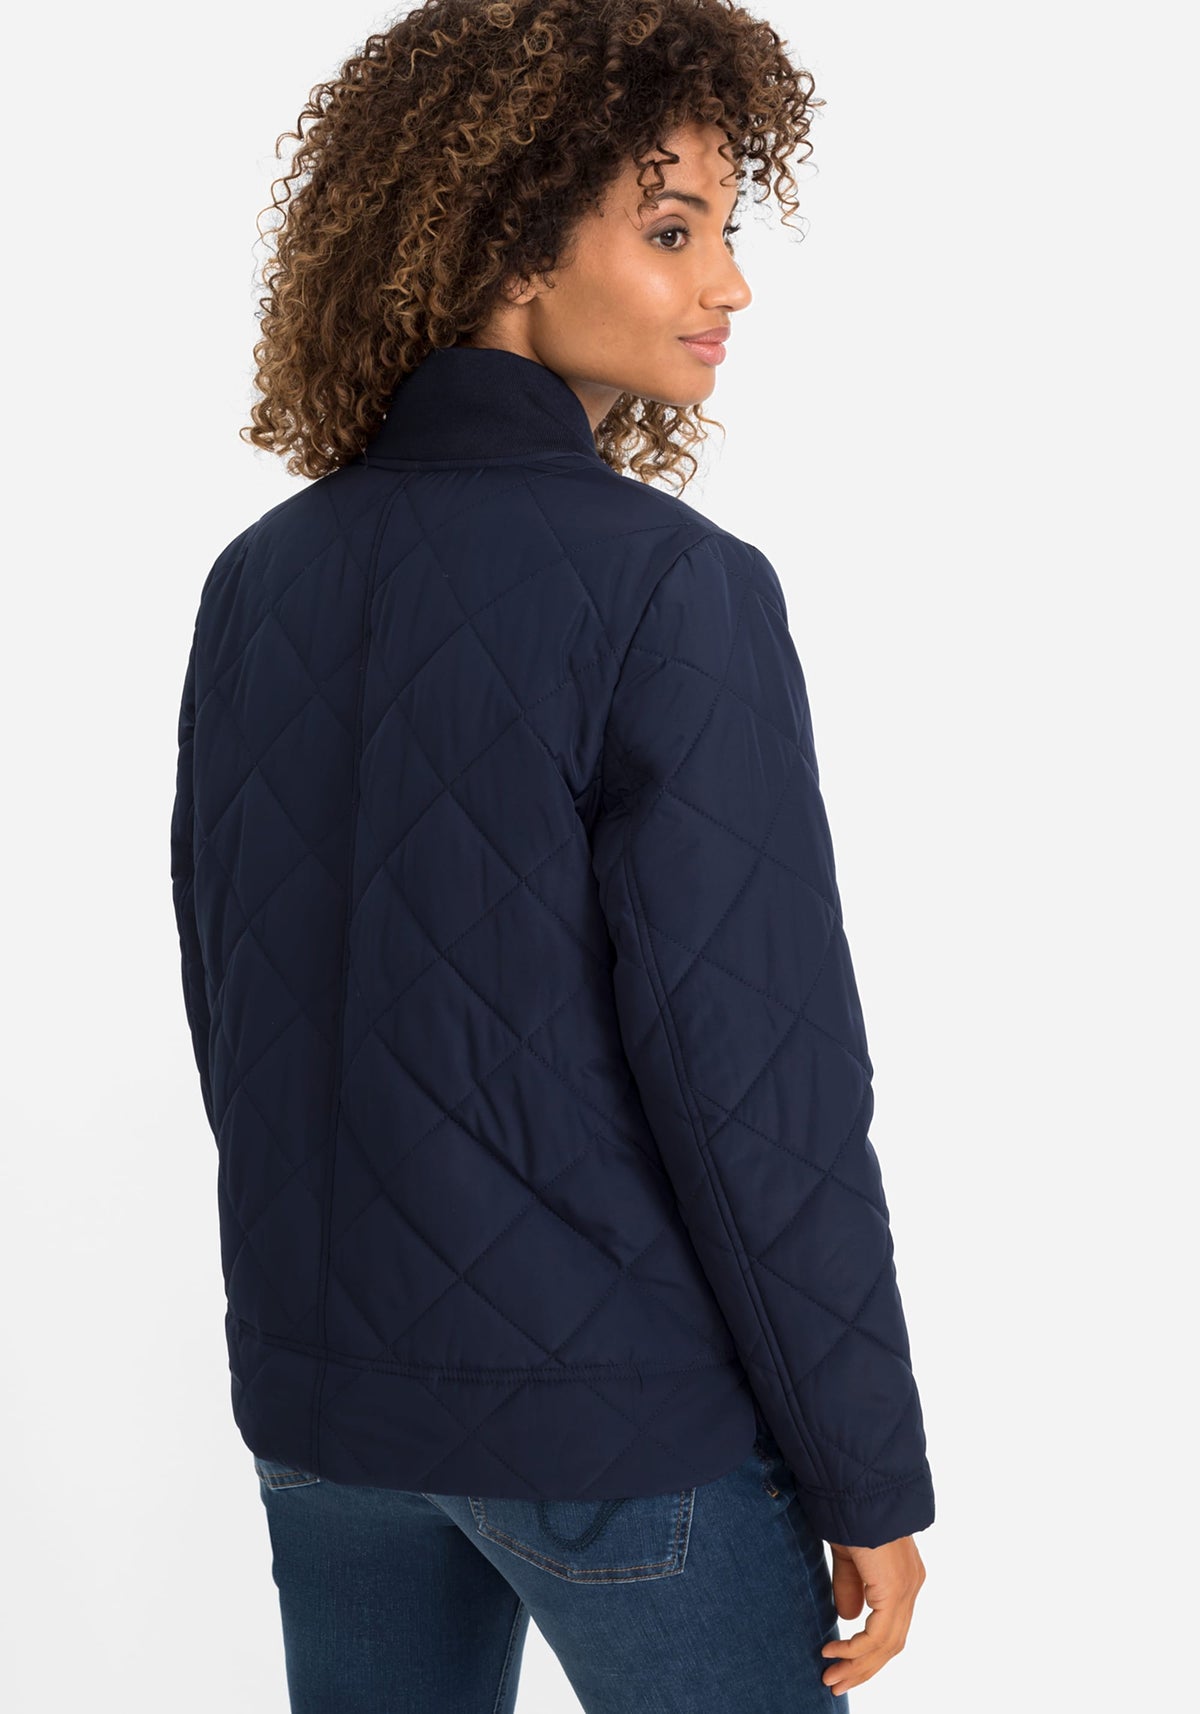 Quilted Bomber Jacket containing REPREVE®